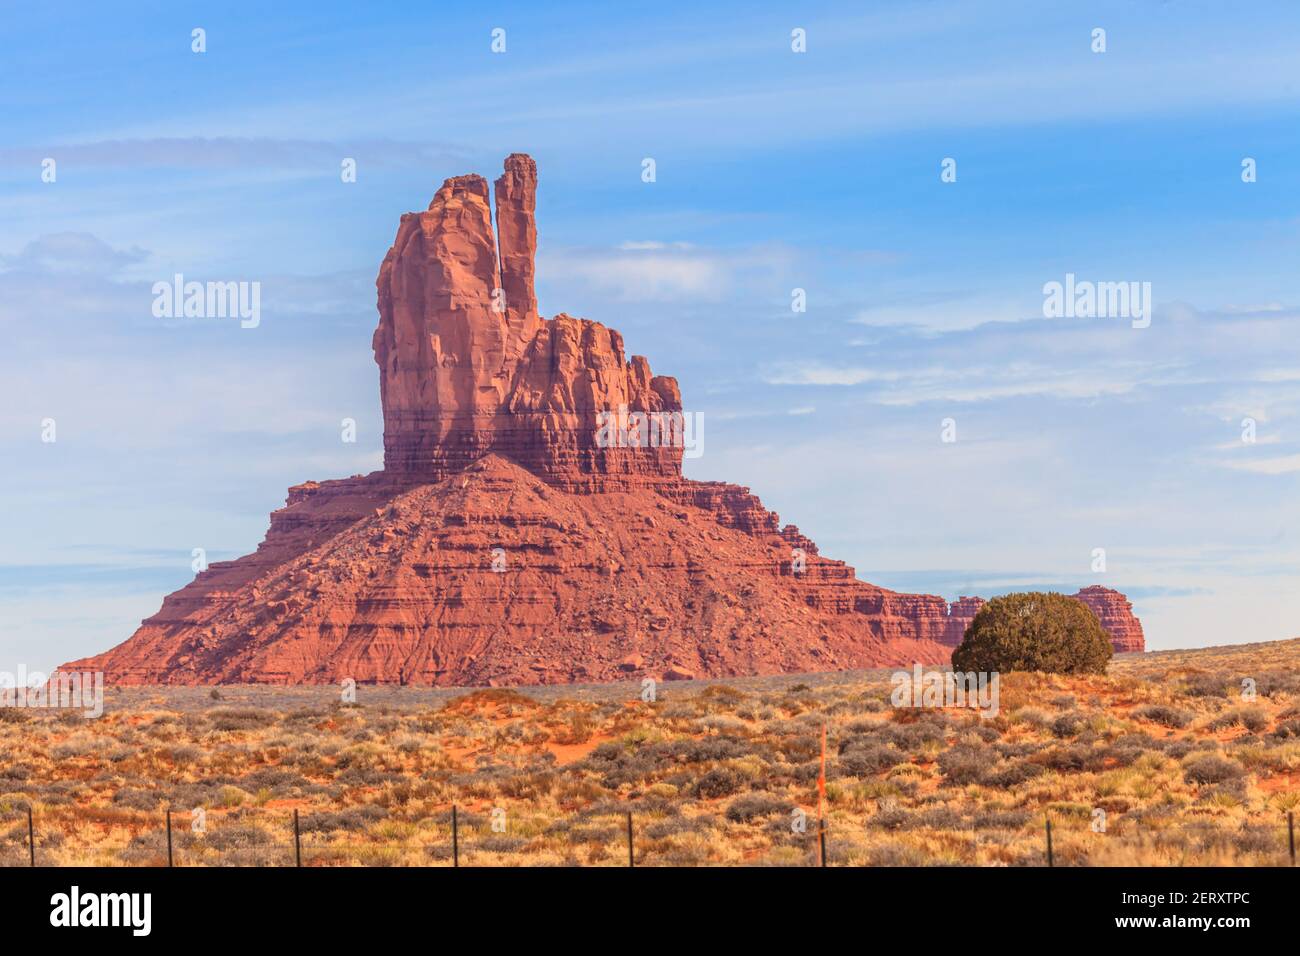 Rock formation at Monument Valley Stock Photo